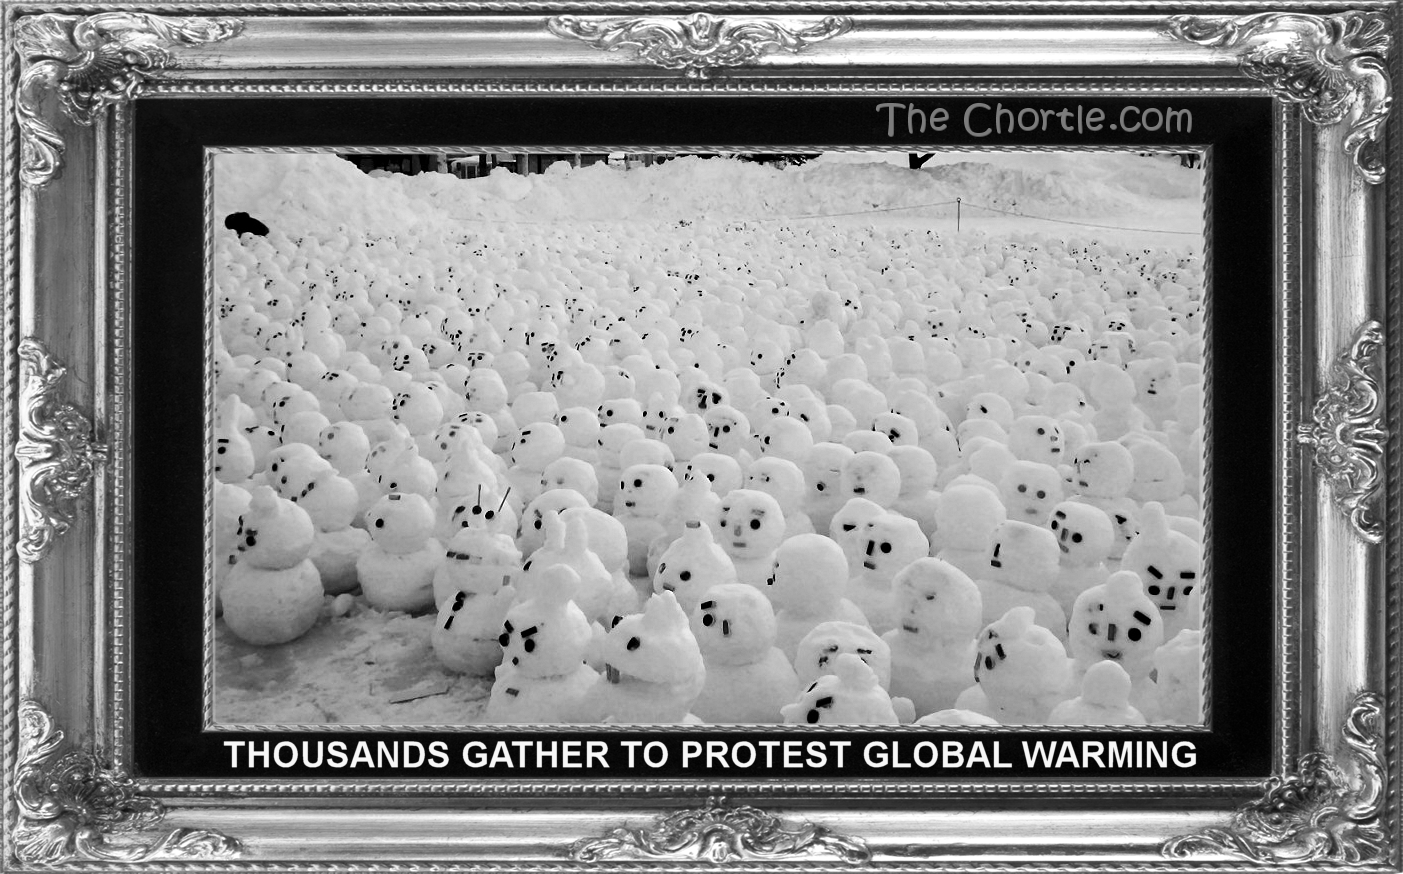 Thousands gather to protest global warming.